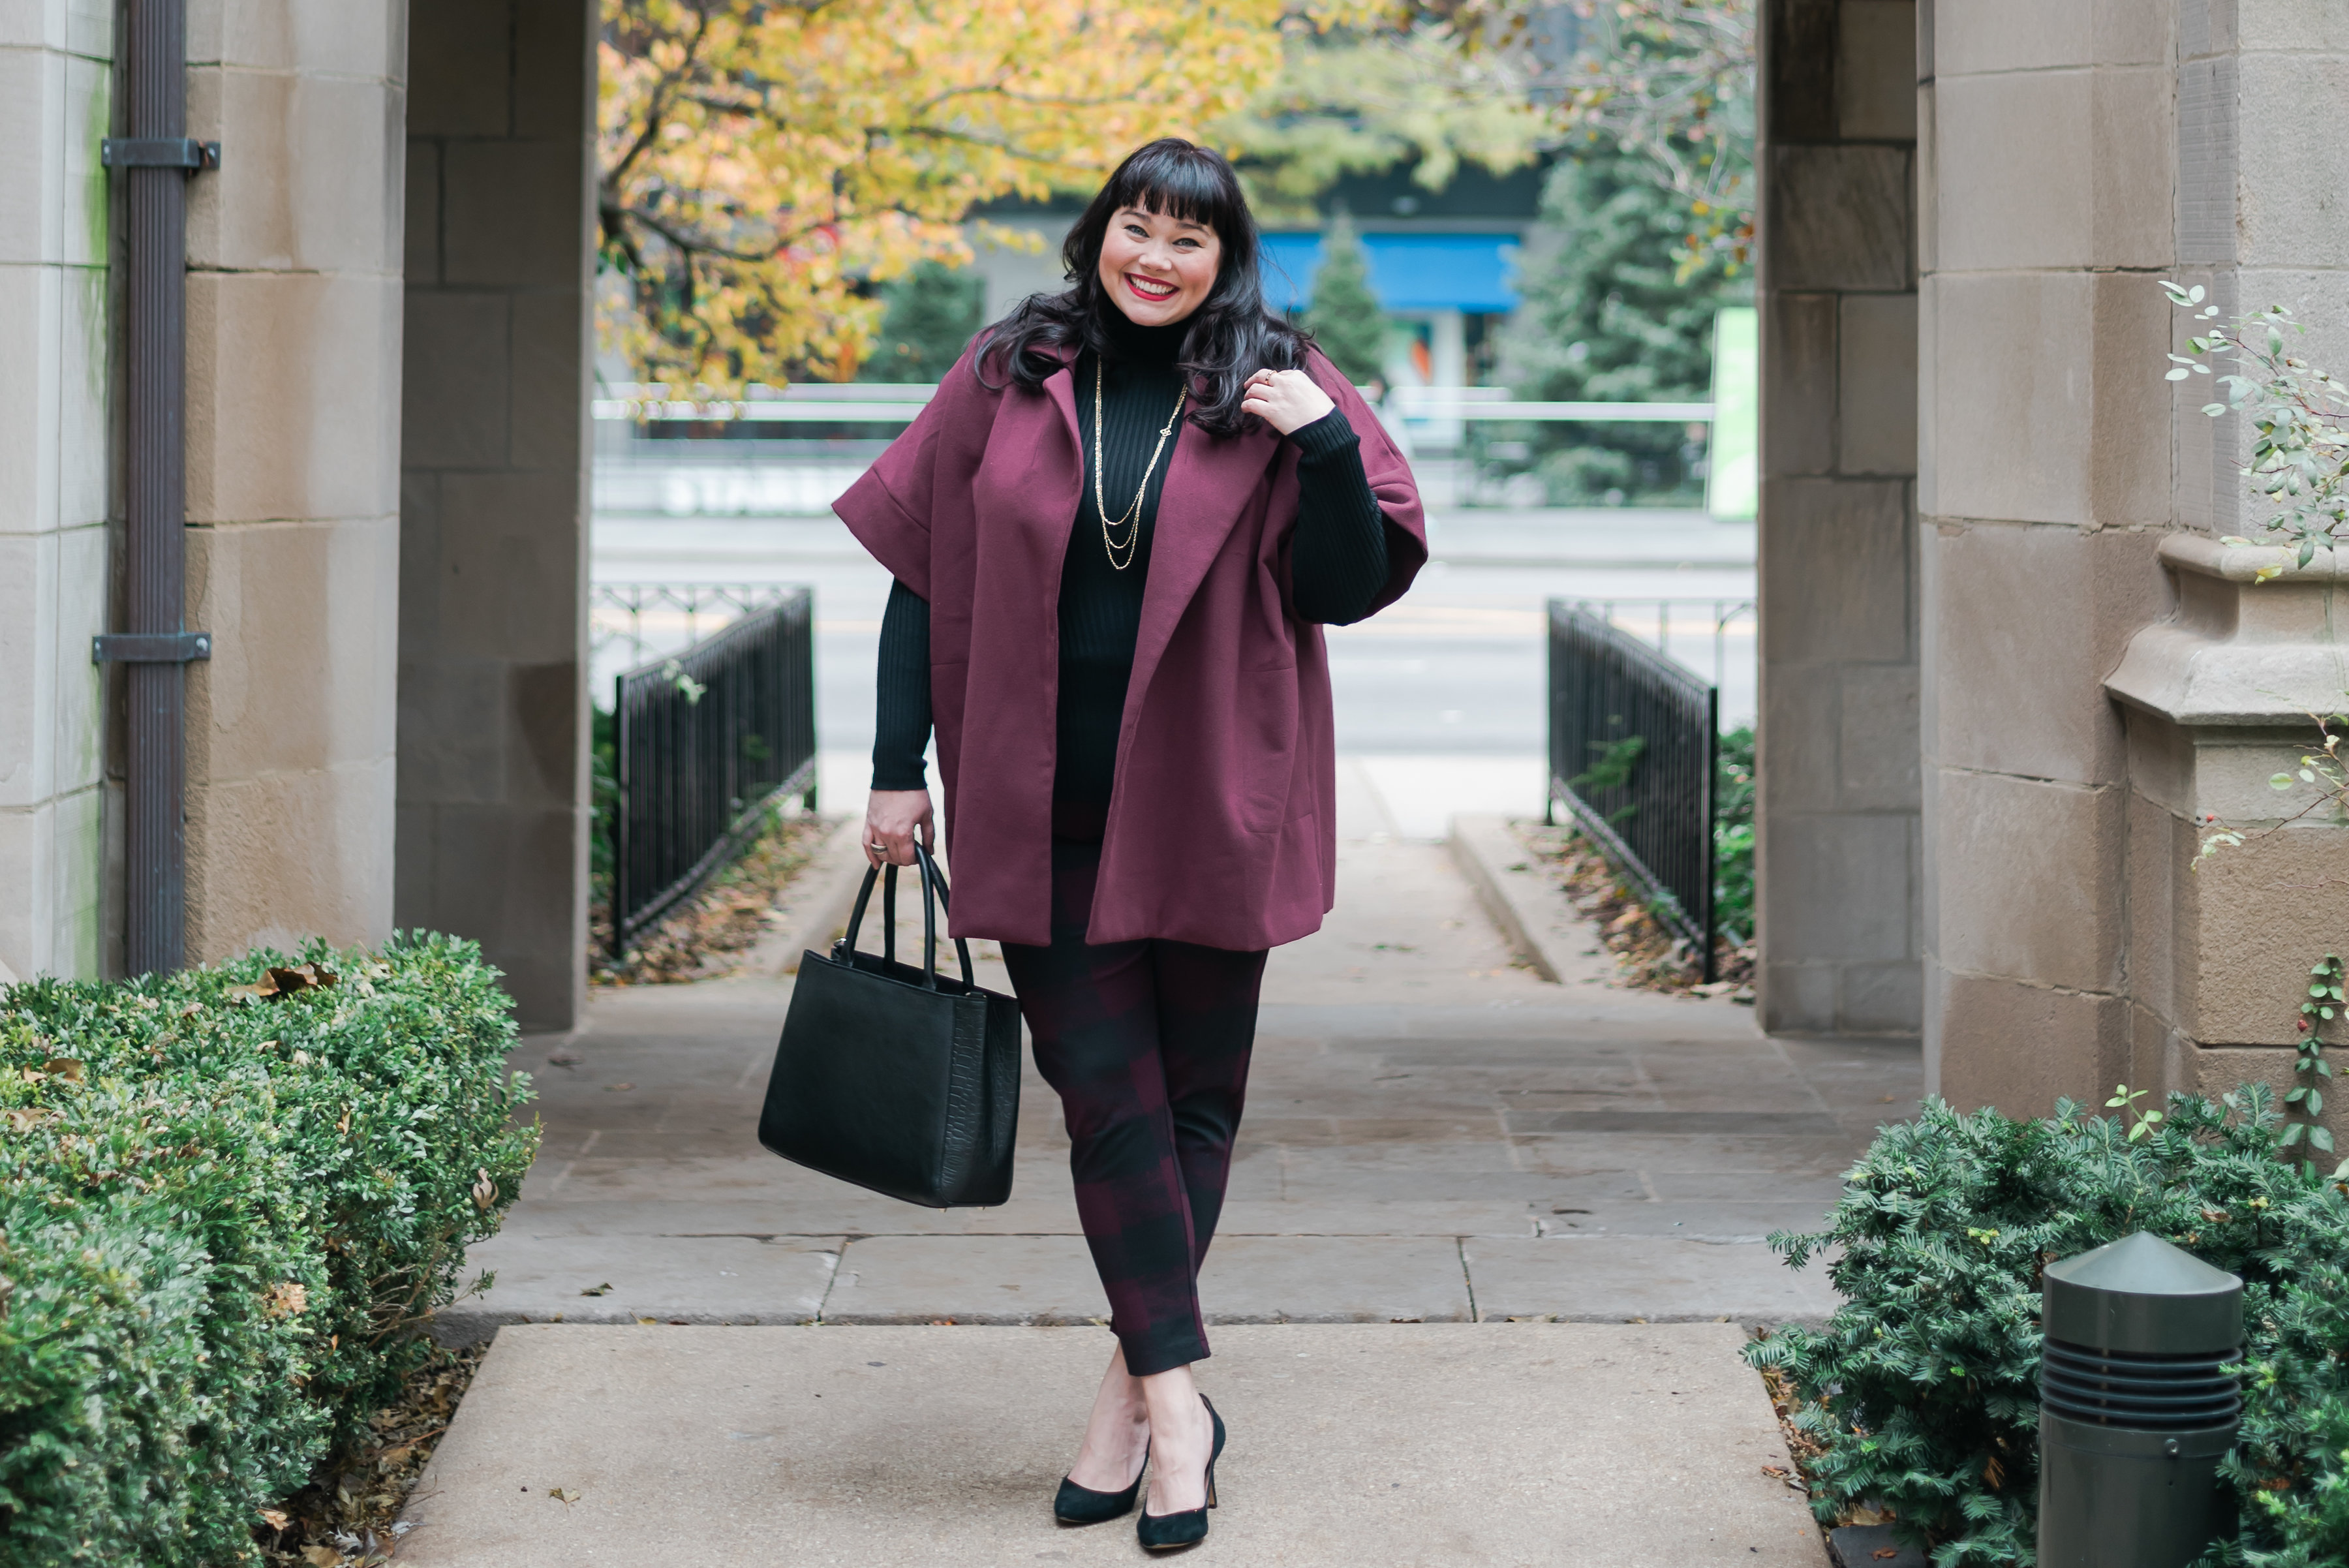 Gwynnie Bee, What to Wear This Thanksgiving, Thanksgiving, Holiday Style, Plus Size Holiday, Plus Size Style, Plus Size Fashion, Style Plus Curves, Chicago Blogger, Chicago Plus Size Blogger, Plus Size Blogger, Amber McCulloch